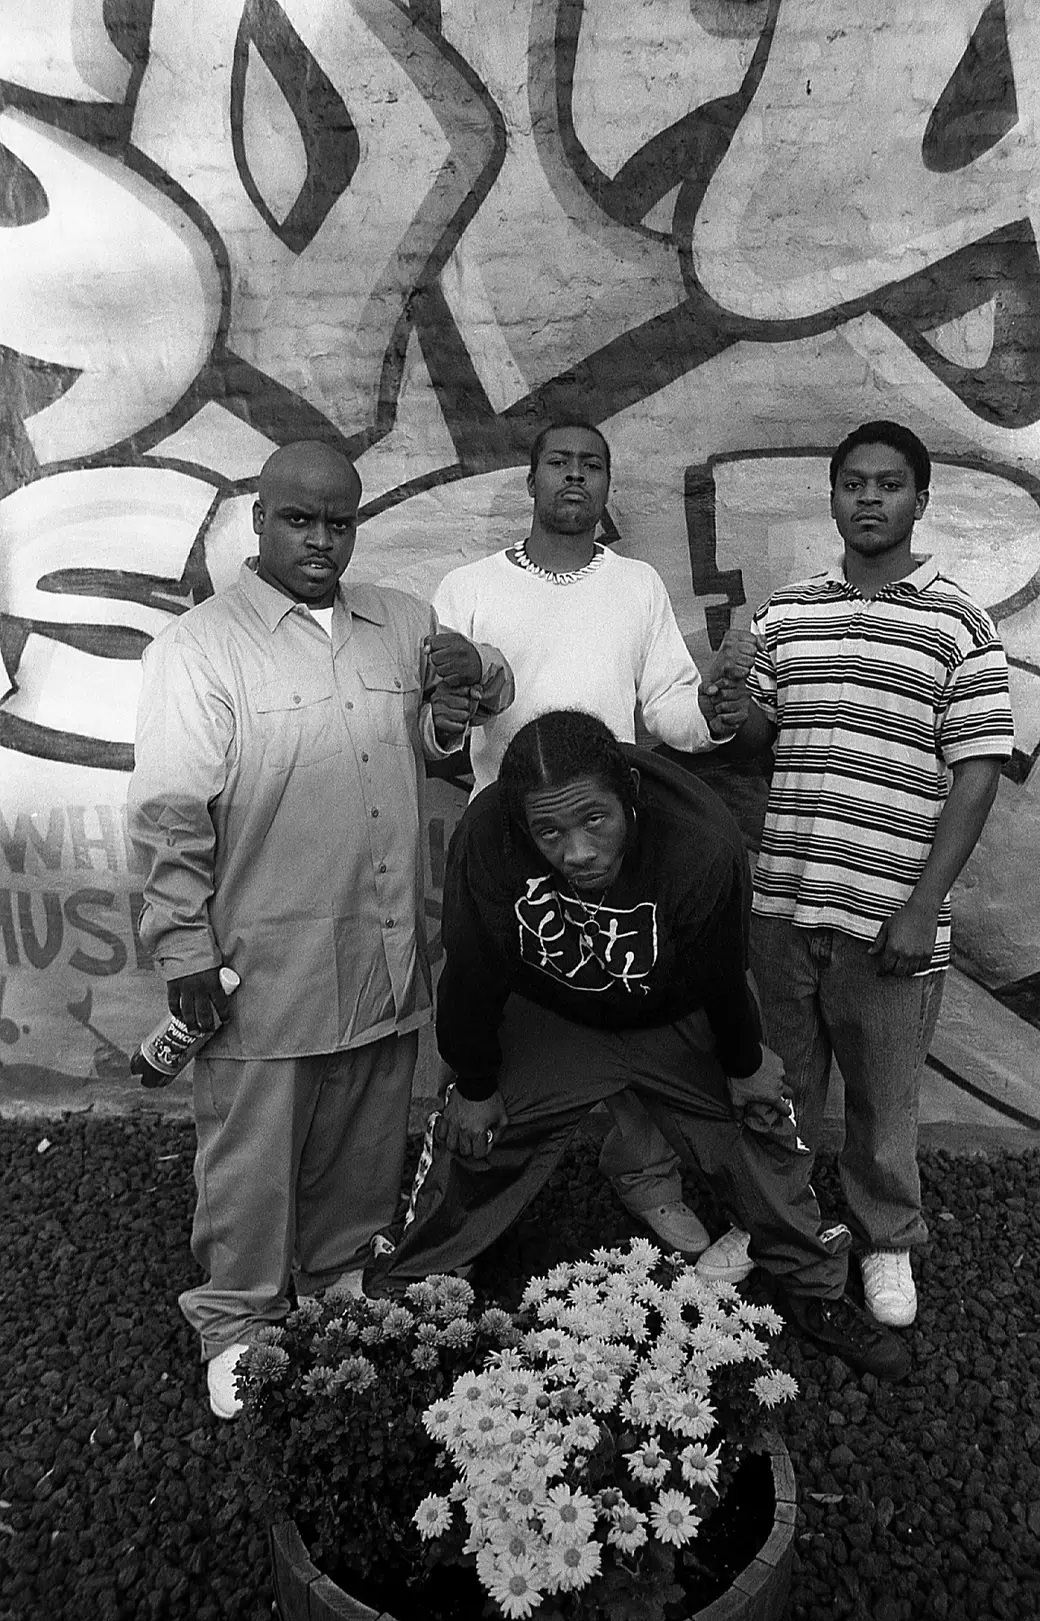 CeeLo, Khujo, T-Mo, and Big Gipp (front) from Goodie Mob poses for photos at George's Music Room in Chicago in October 1995.